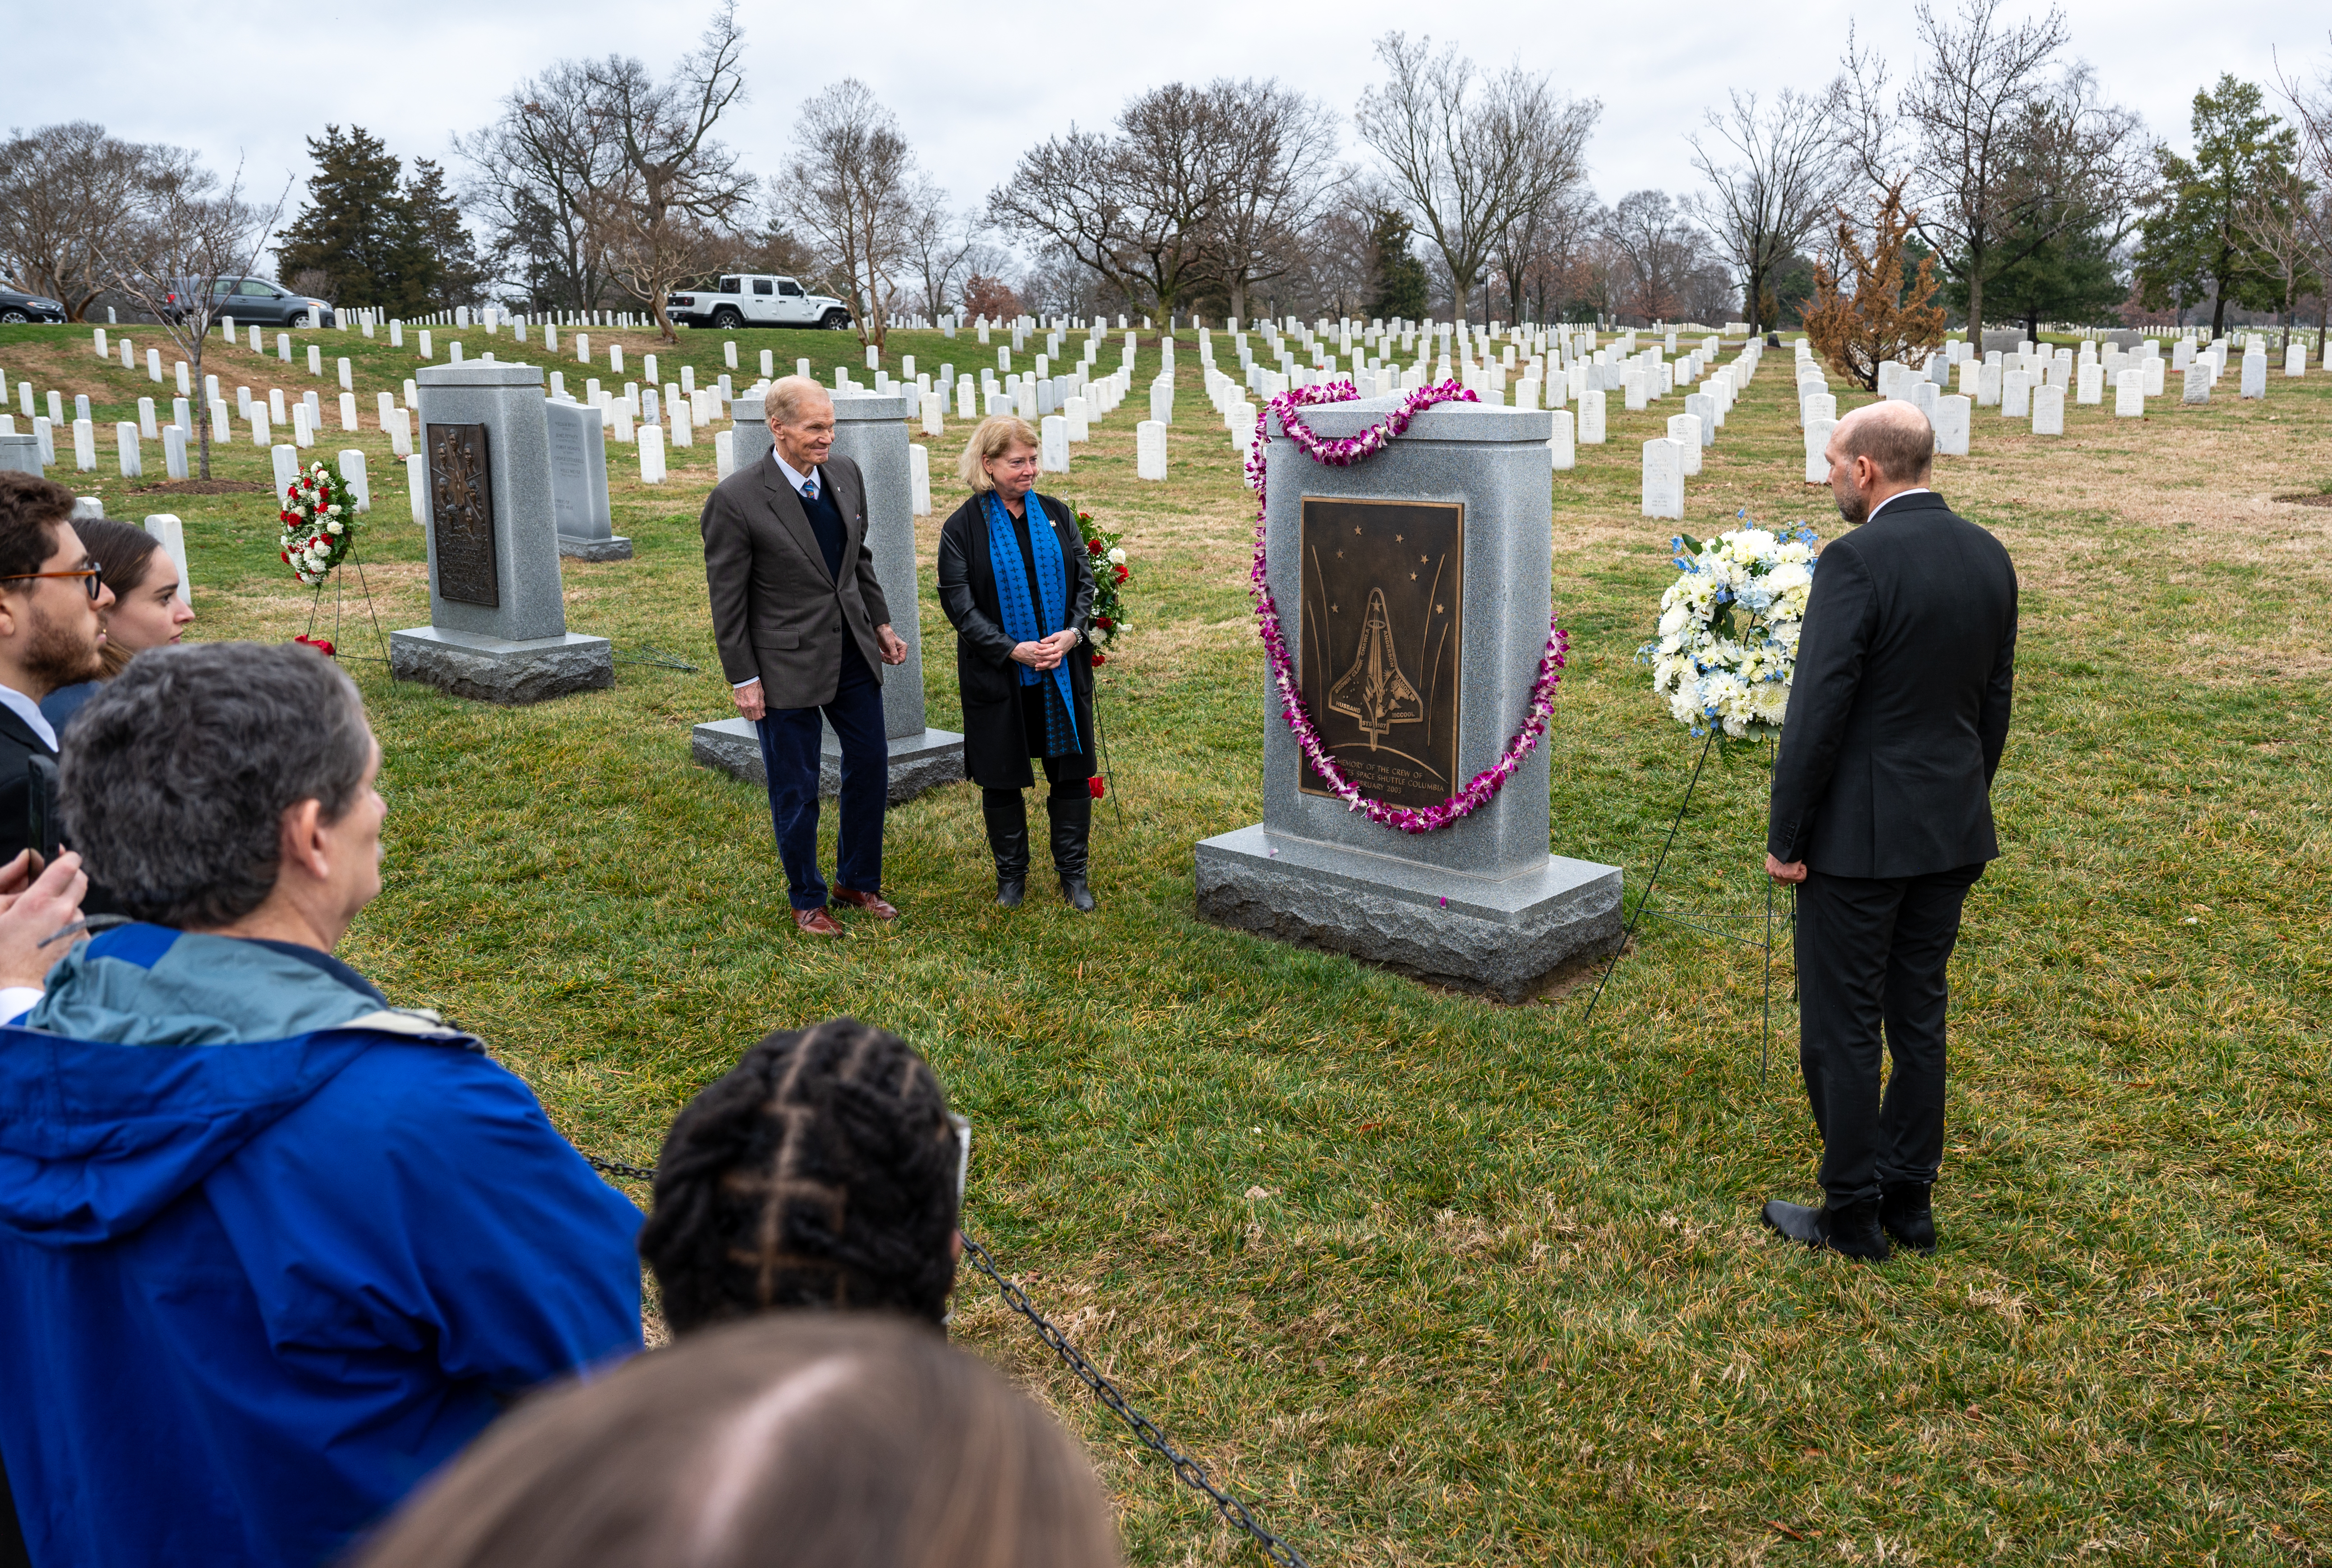 NASA Administrator Bill Nelson (far left), NASA Deputy Administrator Pam Melroy (left), and Deputy Chief of Mission for the Embassy of Israel Eliav Benjamin (right) stand on opposite sides of the Space Shuttle Columbia Memorial at Arlington National Cemetary. They are all dressed in dark clothing and look at the memorial. The memorial is a rectangular dark gray stone with a large bronze plaque on it; it has a large pink flower wreath draped on it. White headstones line the background. In the left foreground, NASA employees look on.